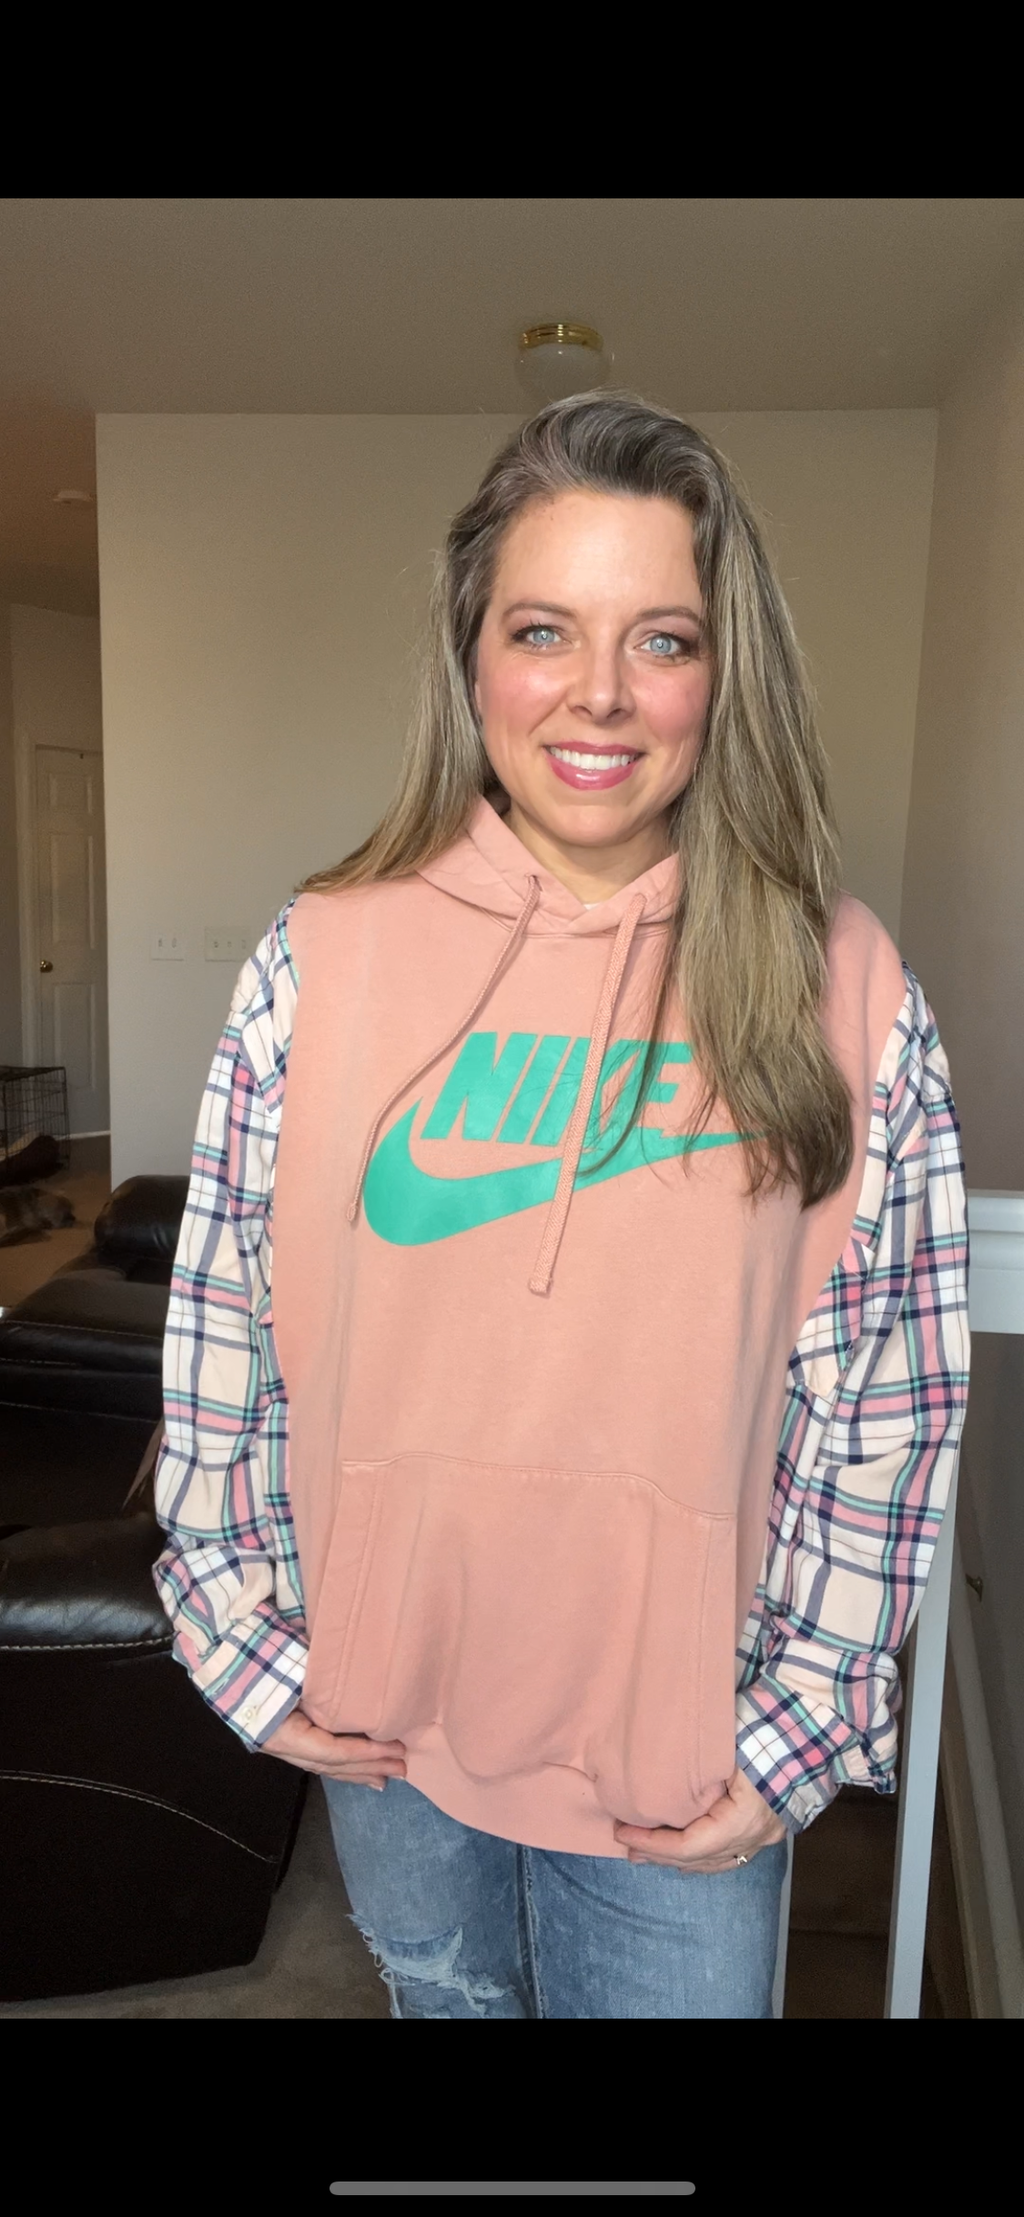 Upcycled Peach￼ Nike - Women’s XL/1X – midweight sweatshirt with thin flannel sleeves – no cuffs available￼